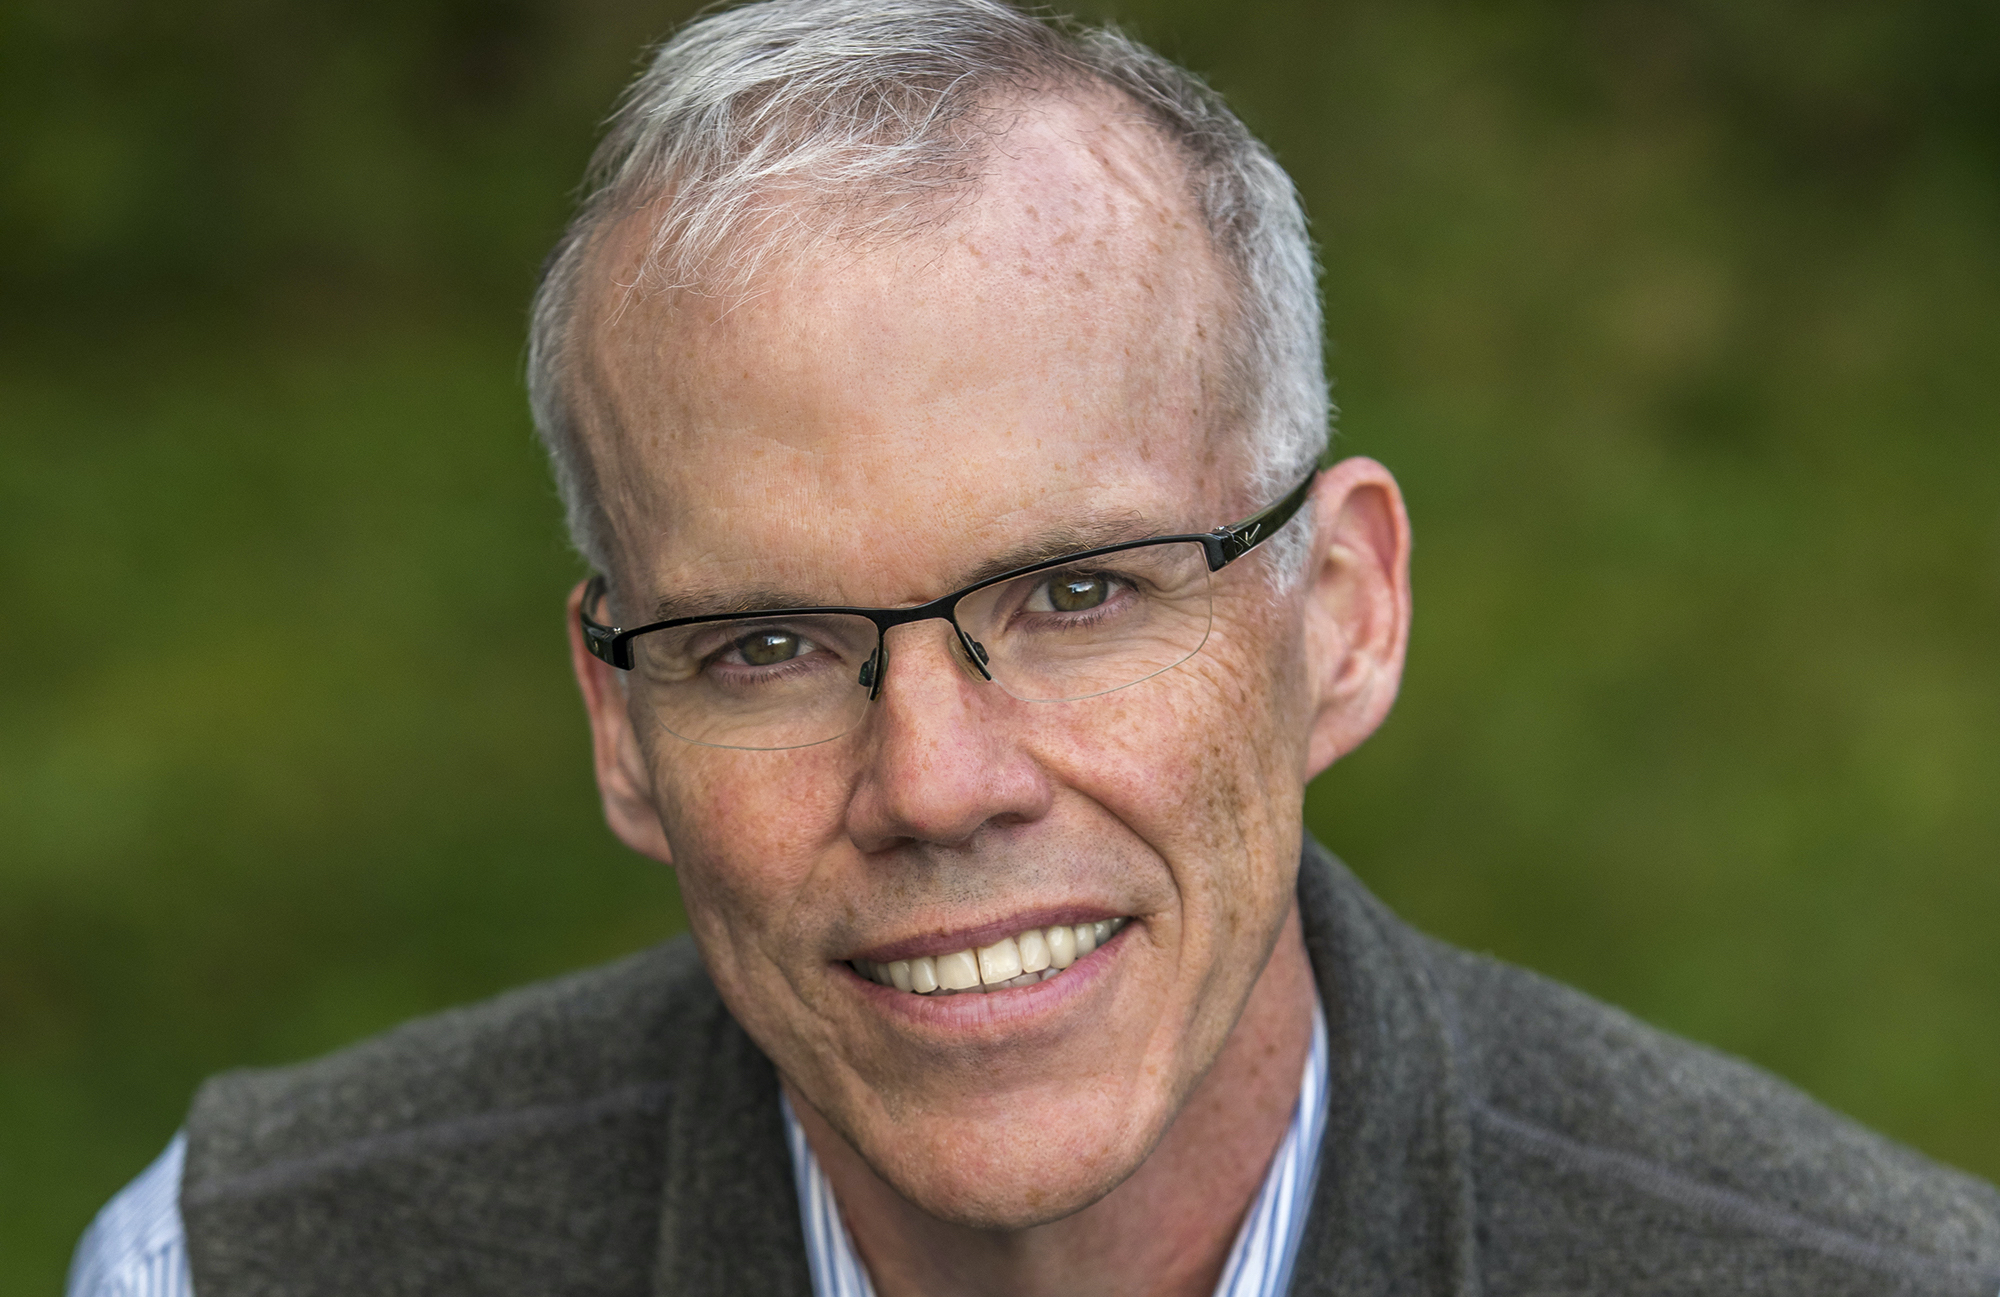 Bill McKibben reflects on brand advocacy, the final frontier of climate leadership